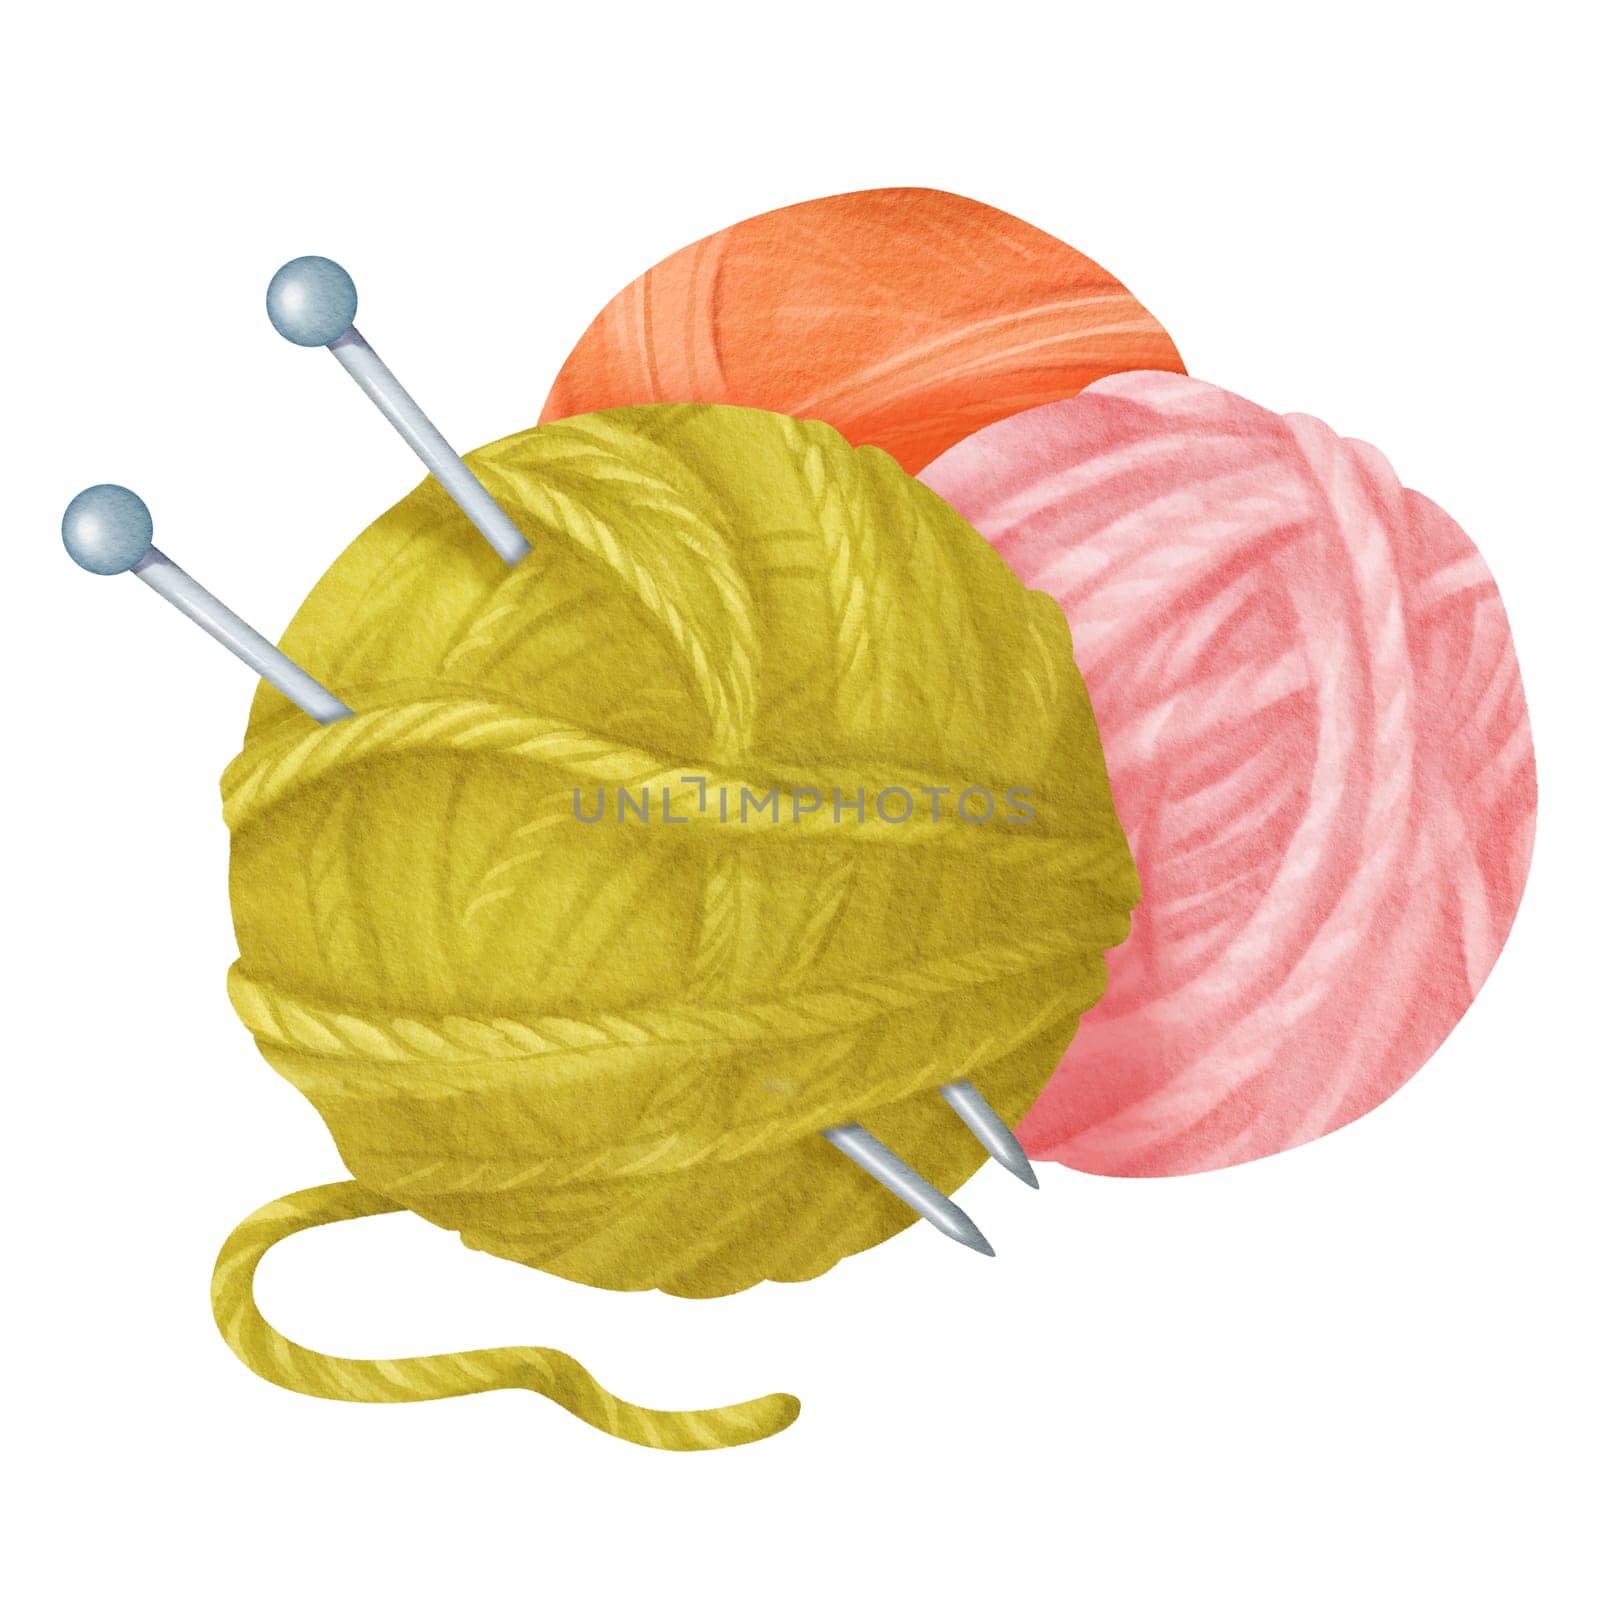 A composition featuring multicolored yarn skeins in green, pink, and orange, complemented by steel knitting needles. for crafting blogs, knitting tutorials, or DIY designs. Watercolor illustration by Art_Mari_Ka